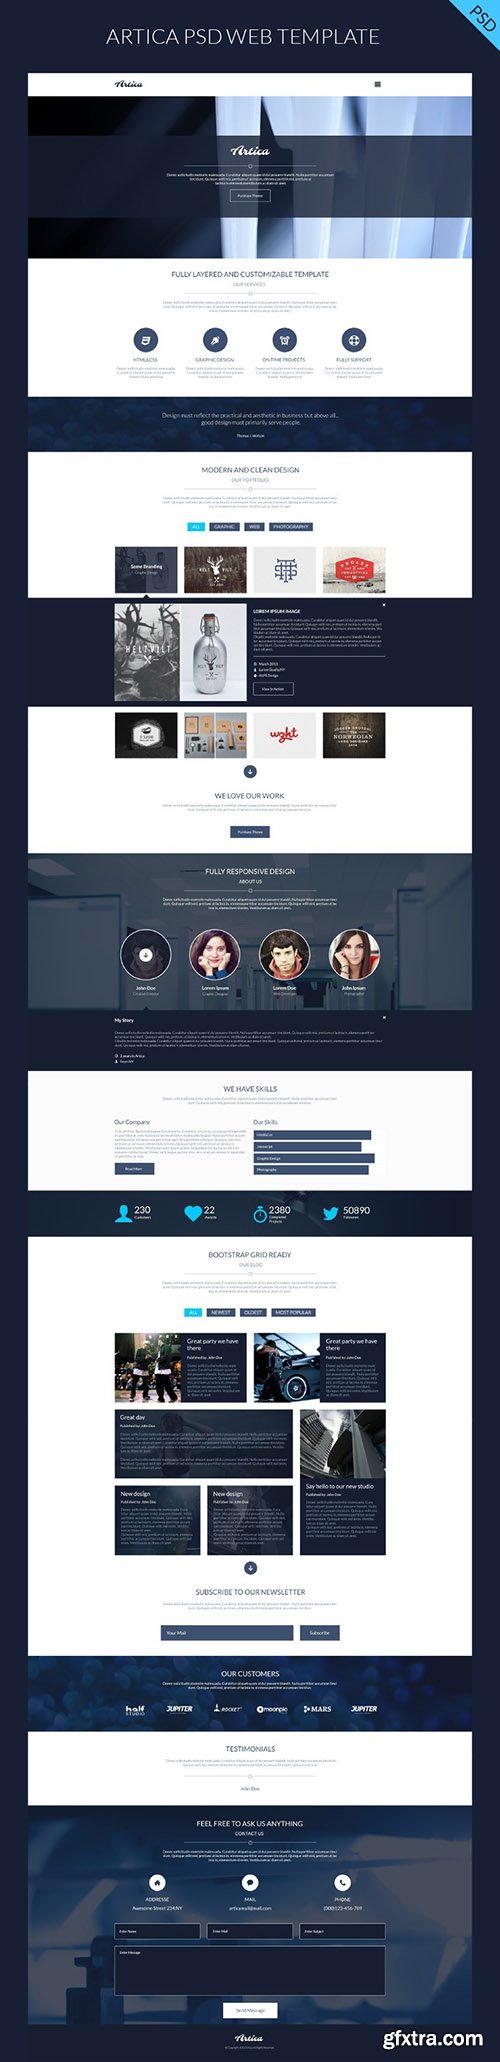 PSD Web Template - Artica - One Page